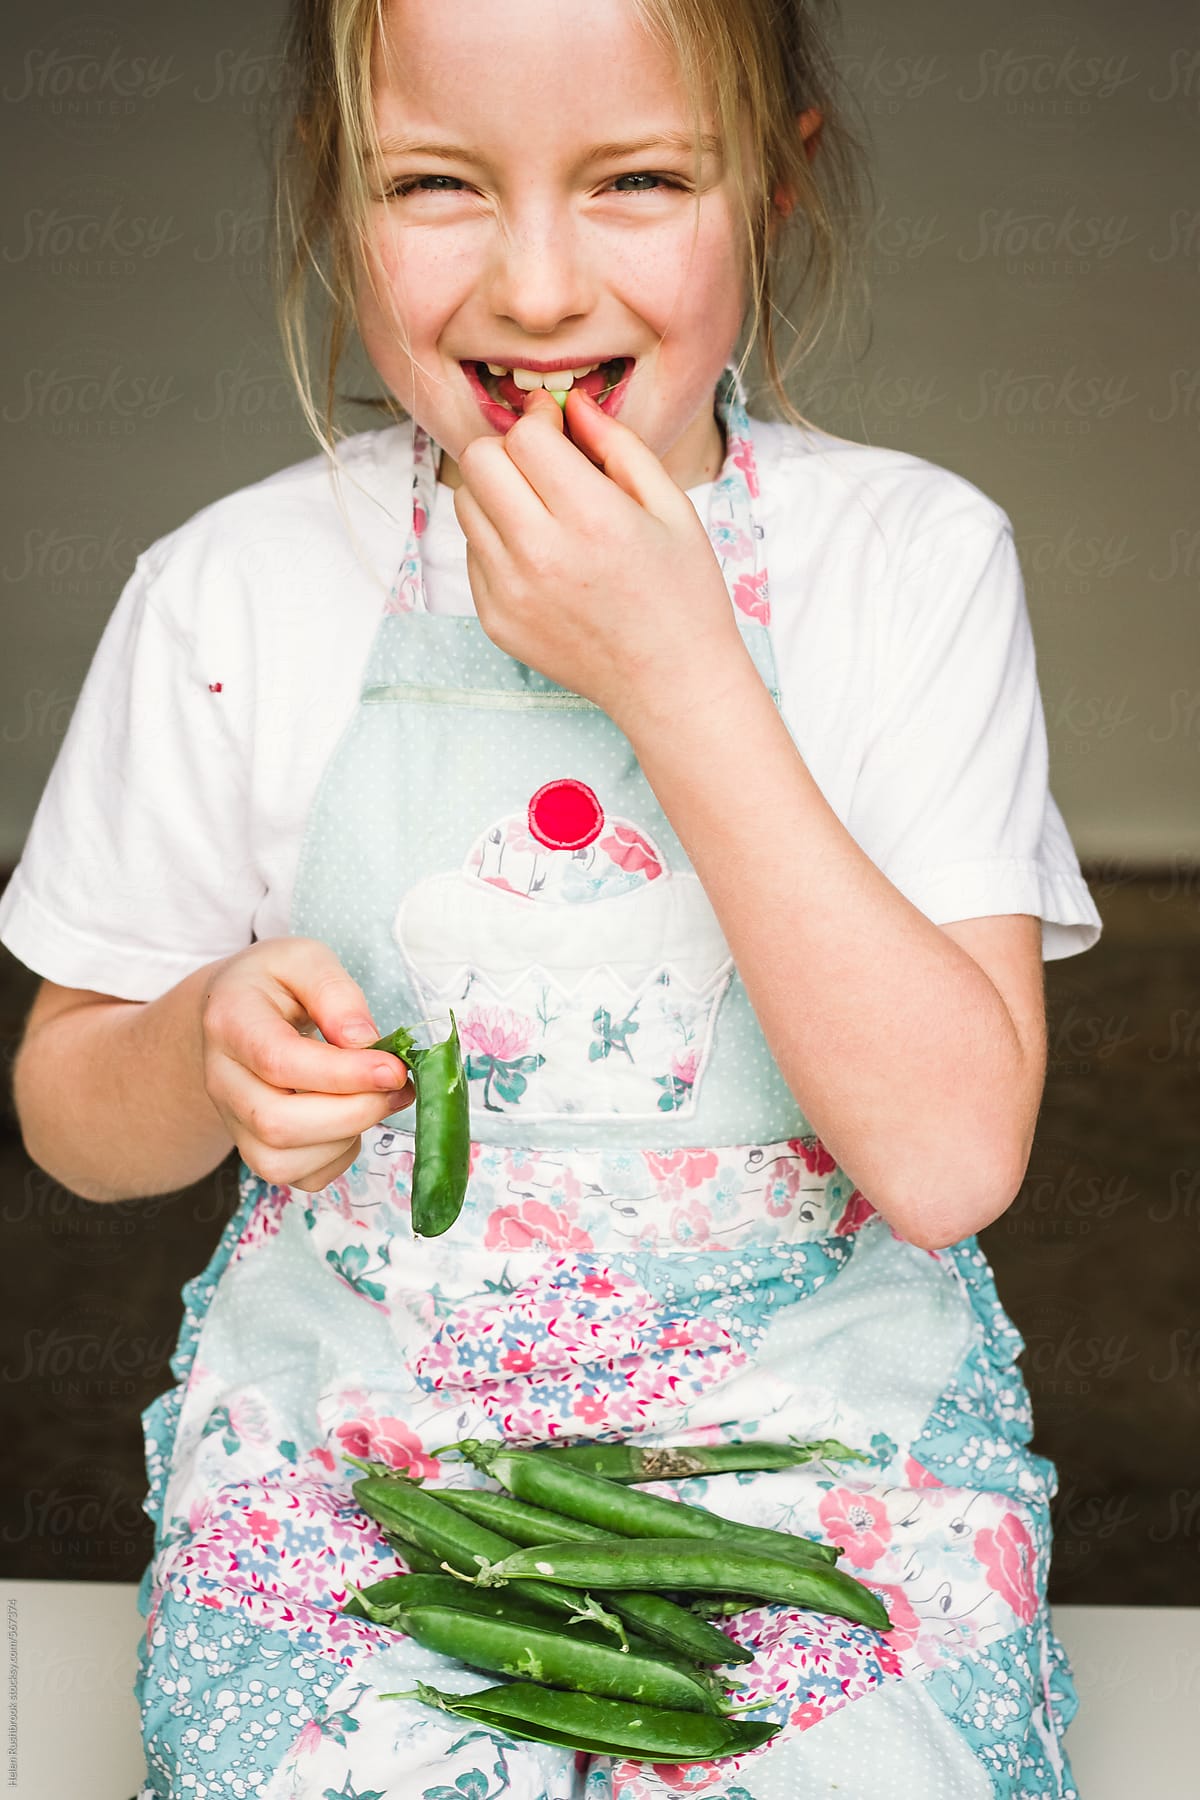 A happy little girl shelling and eating fresh peas.